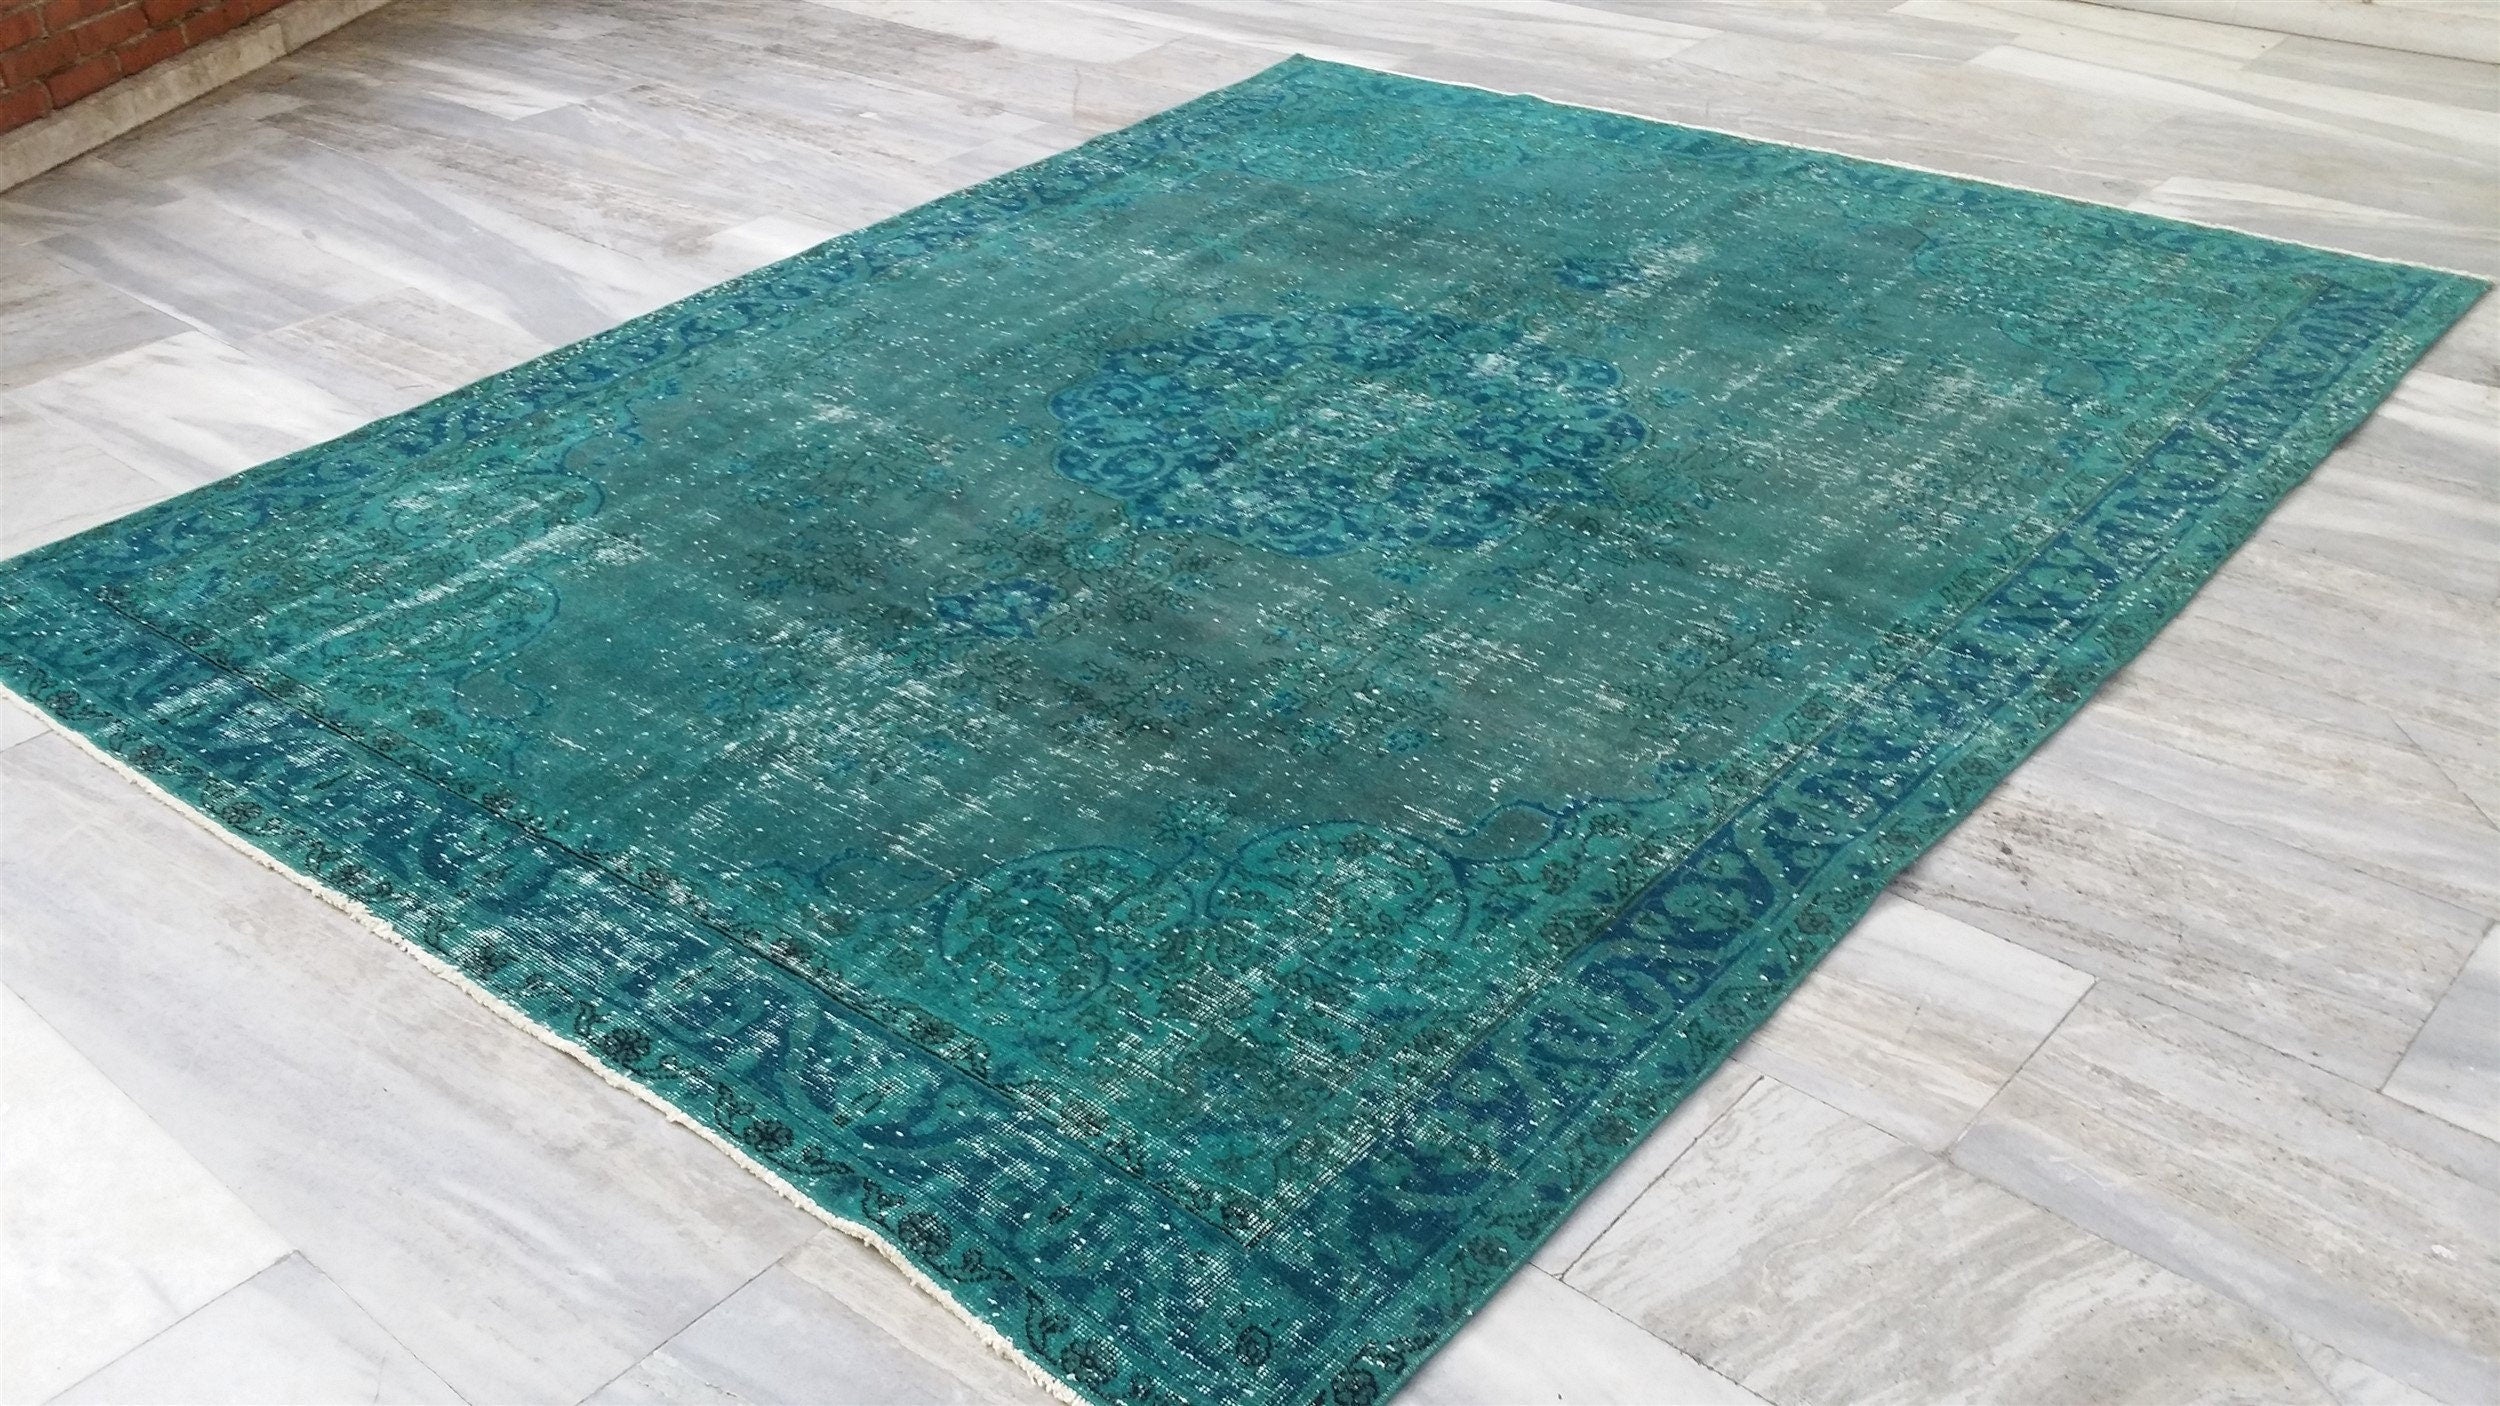 Overdyed Blue Persian Rug, Recycled Vintage Rug 9'9"x6'5"